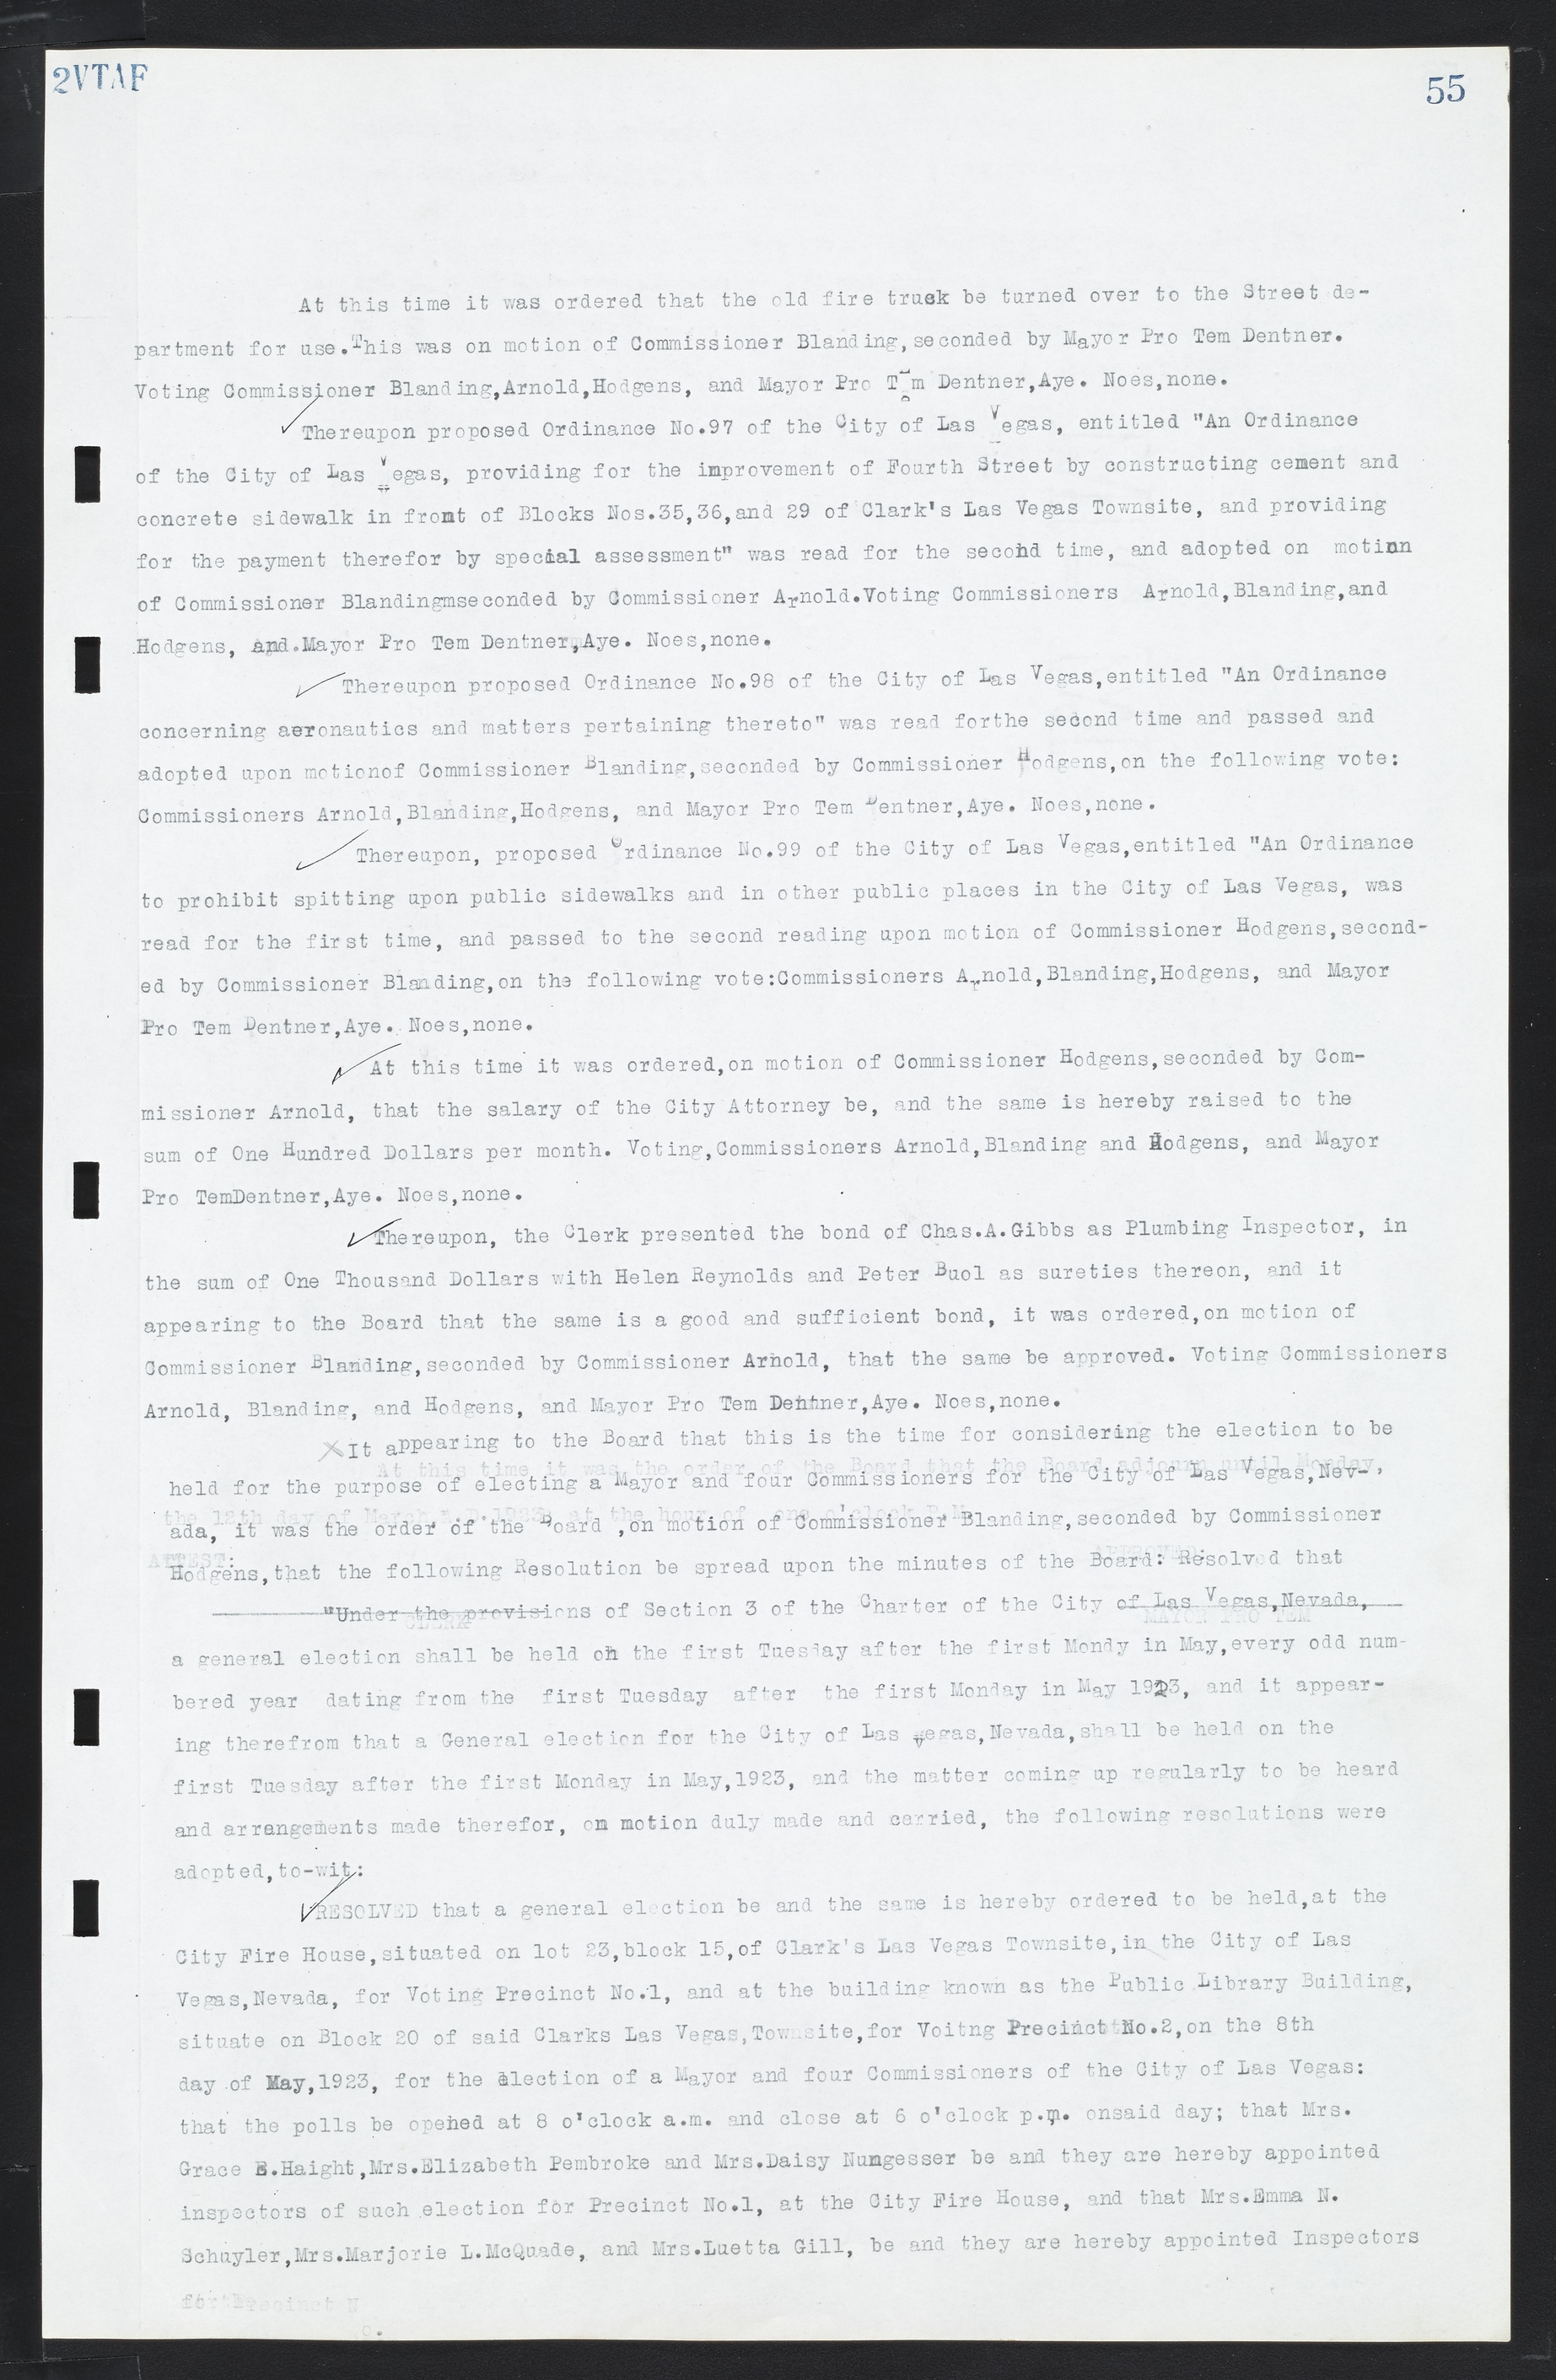 Las Vegas City Commission Minutes, March 1, 1922 to May 10, 1929, lvc000002-62